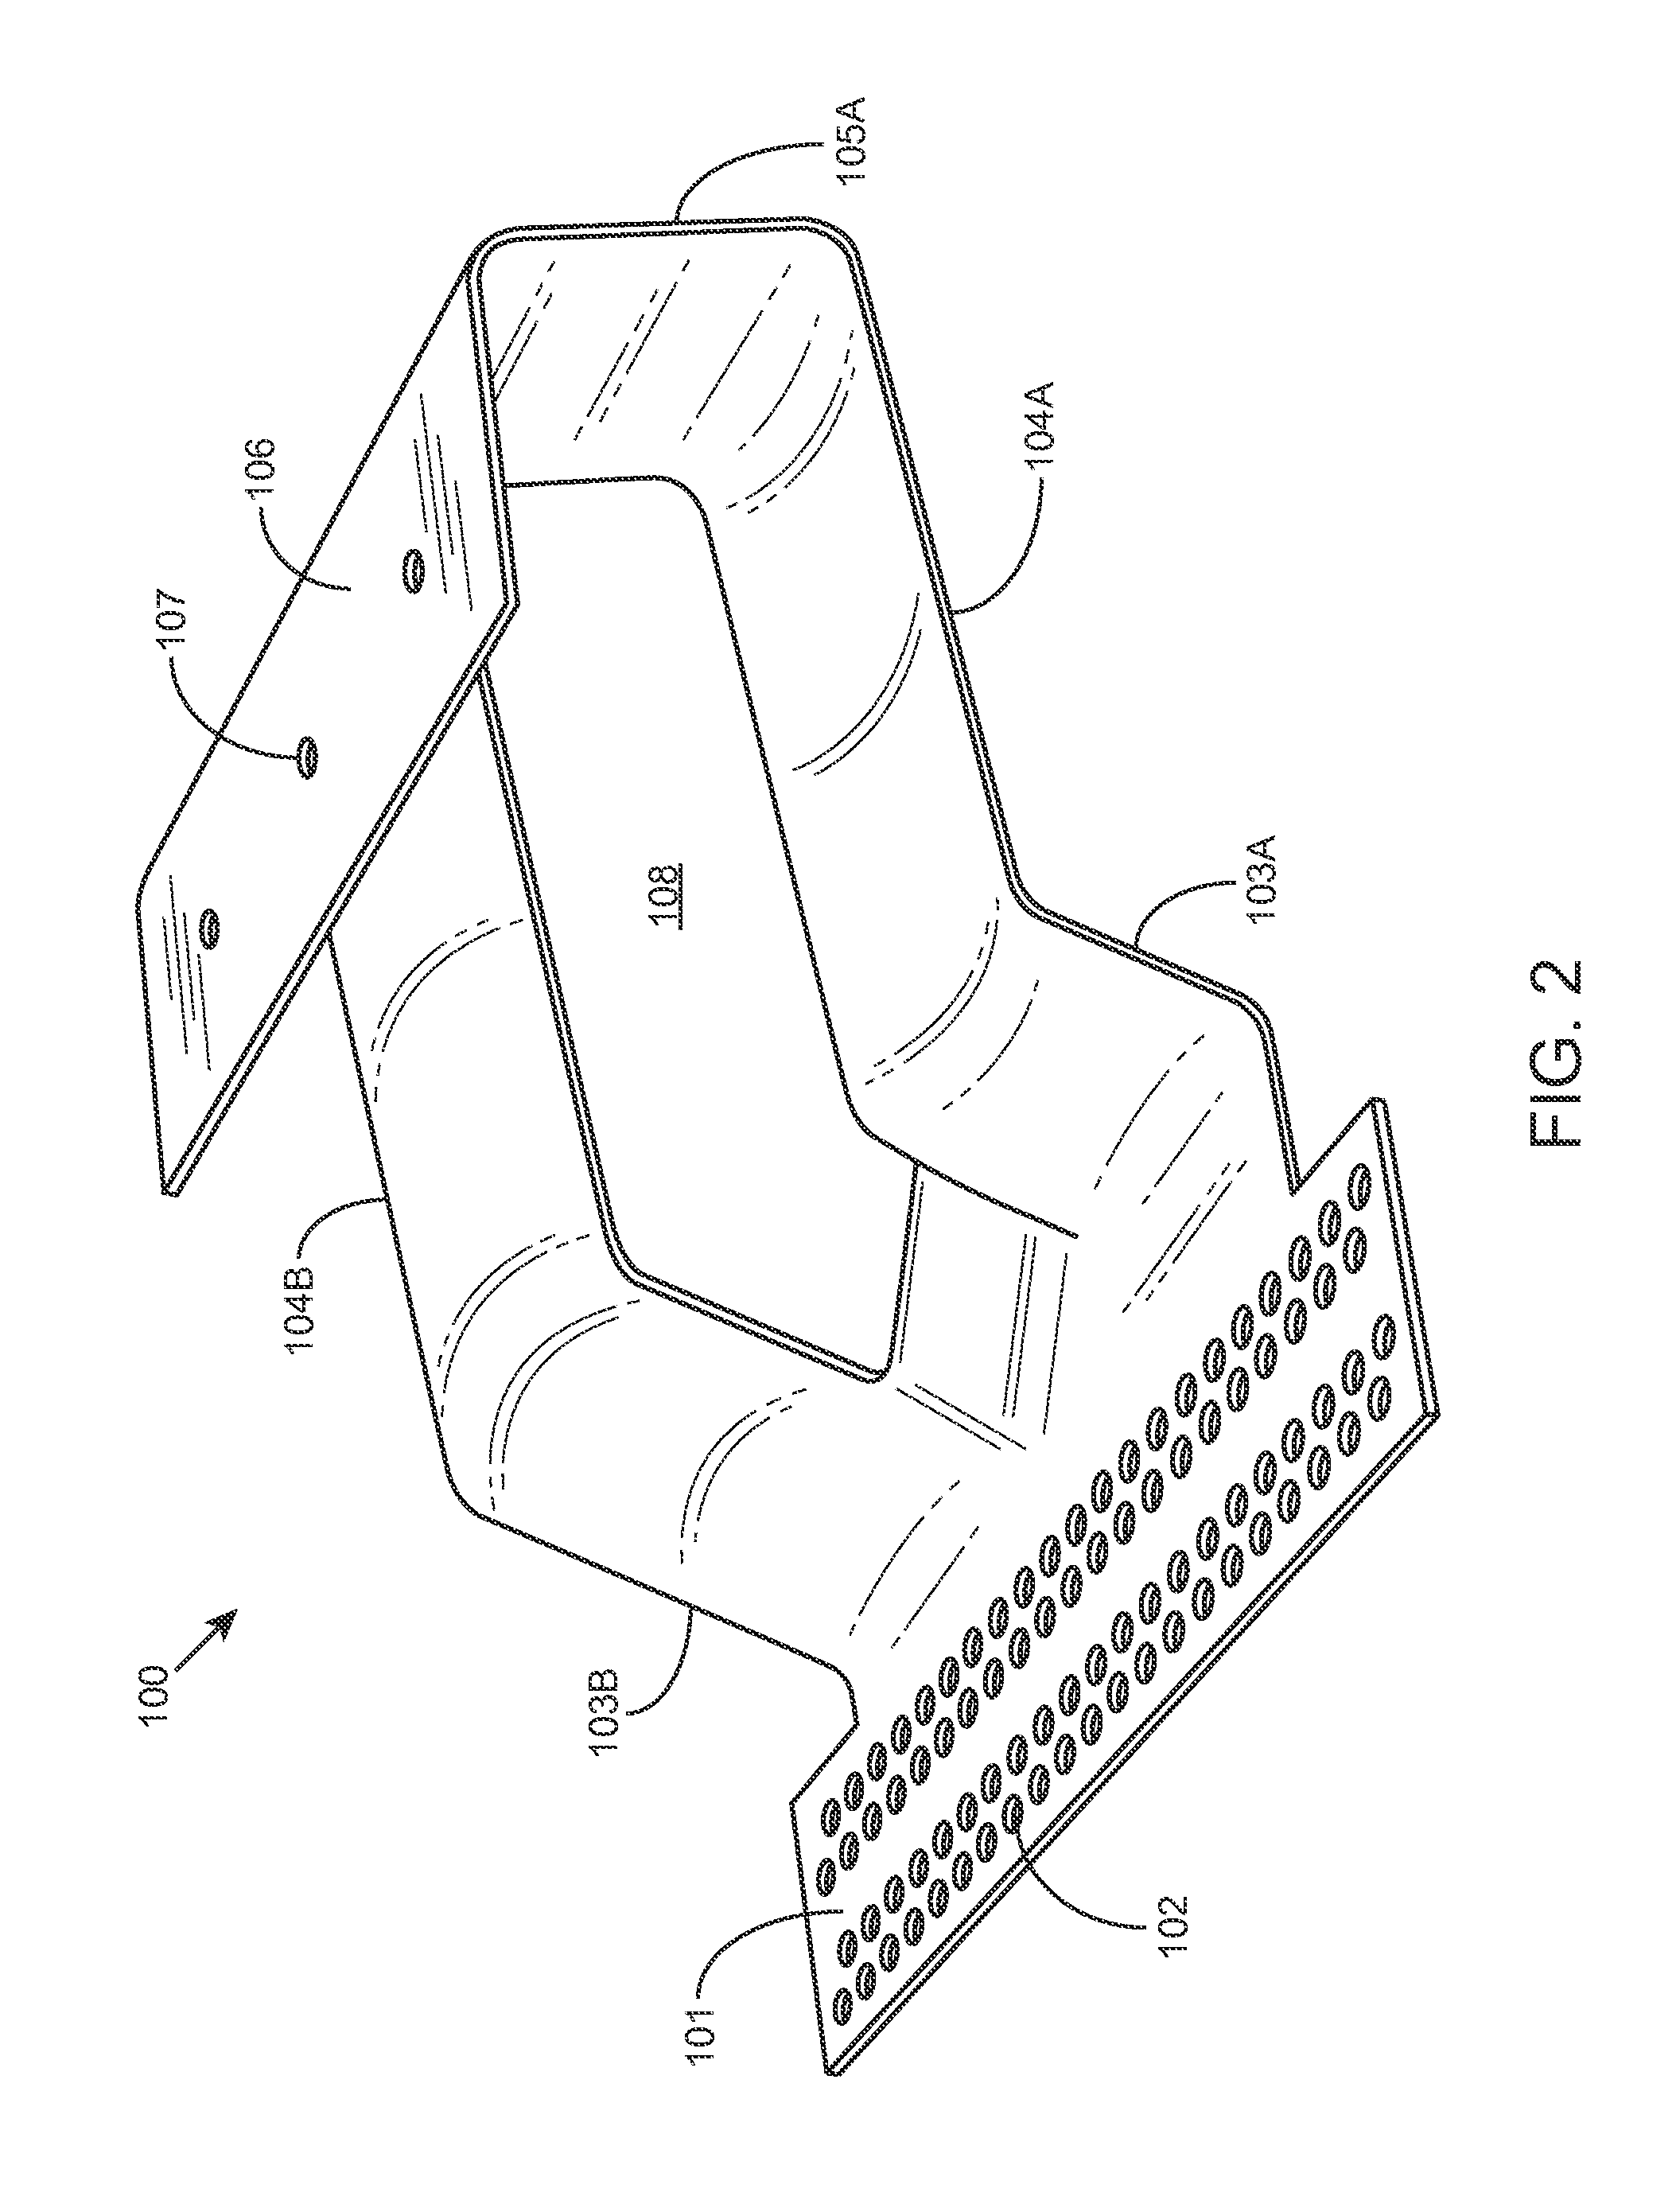 Integrated hook and flashing for photovoltaic module installation on tile roofs